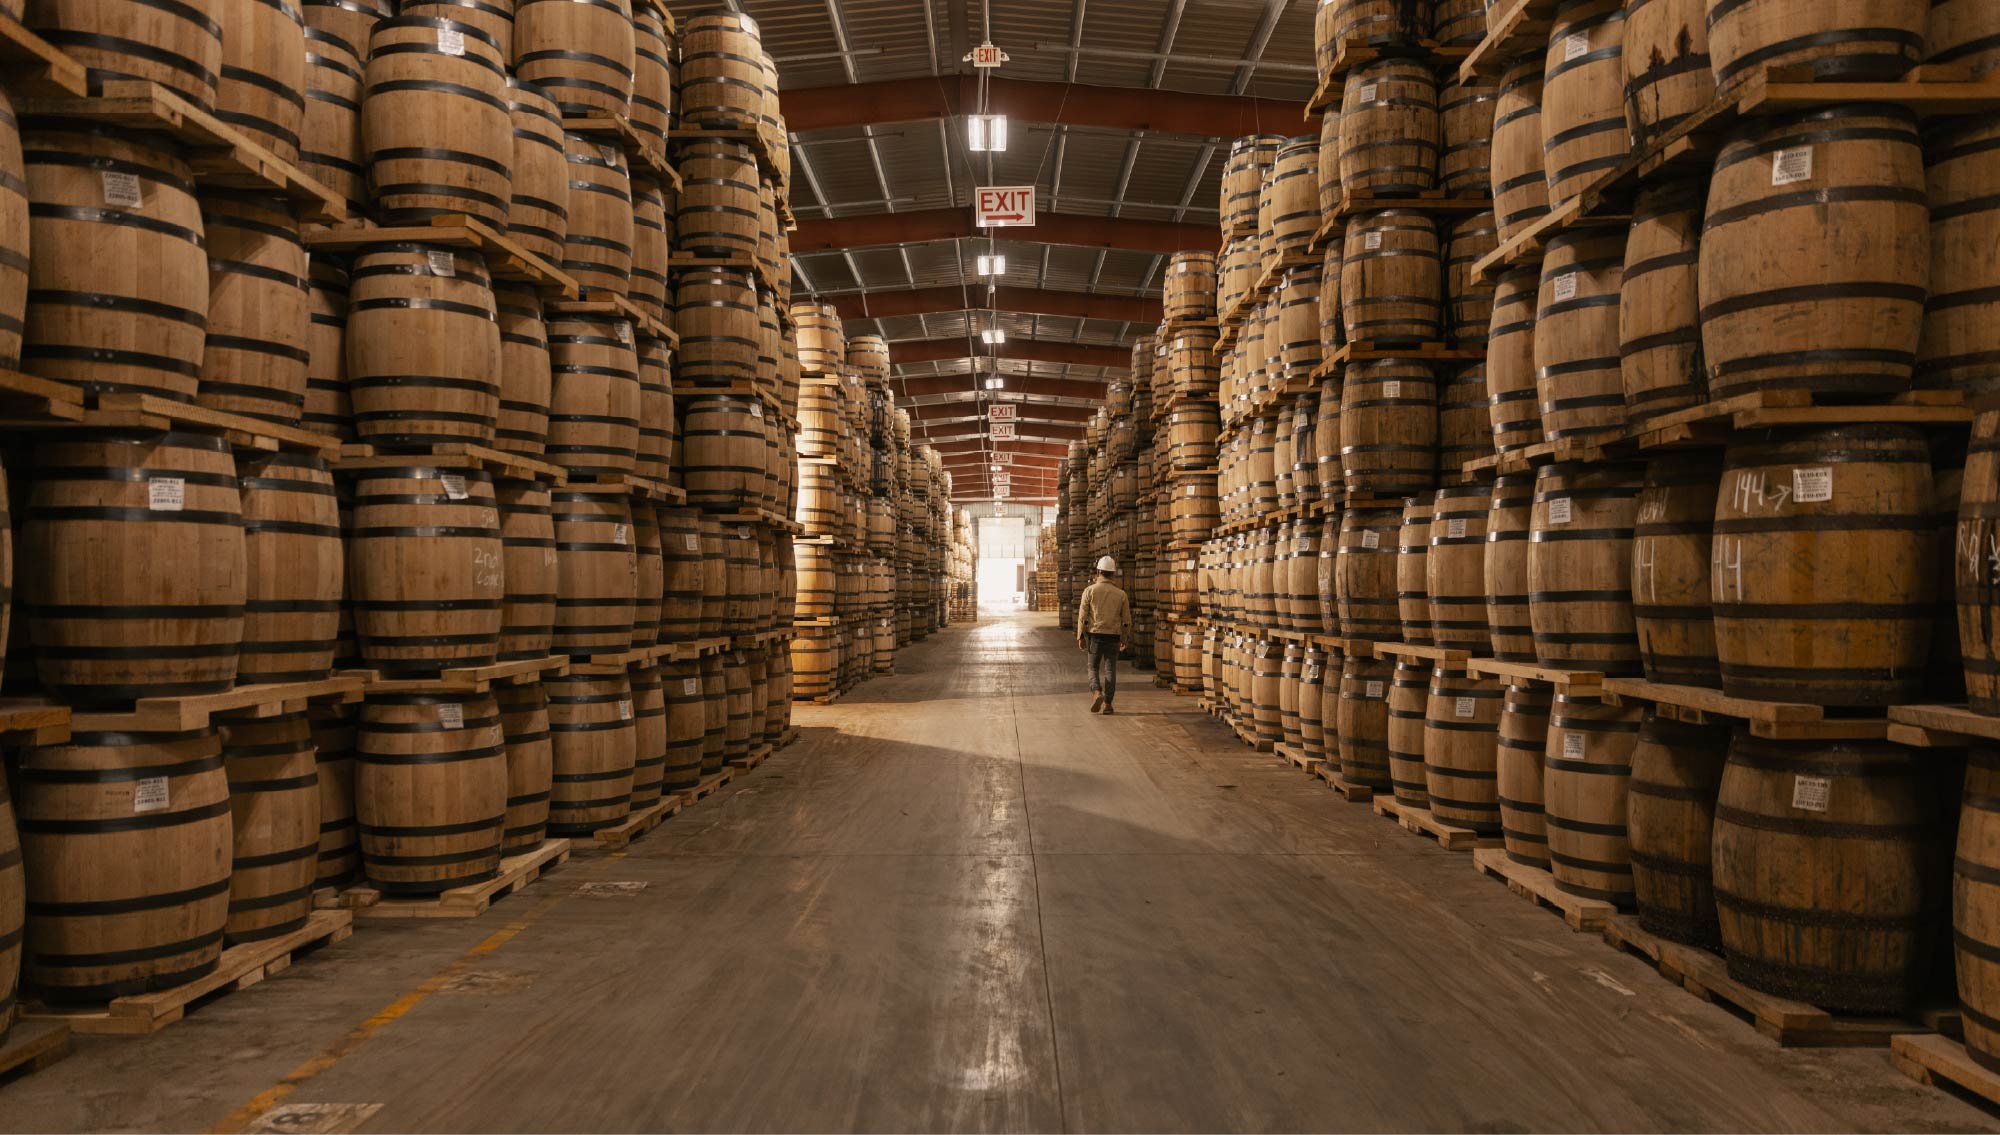 A warehouse full of barrels for aging bourbon